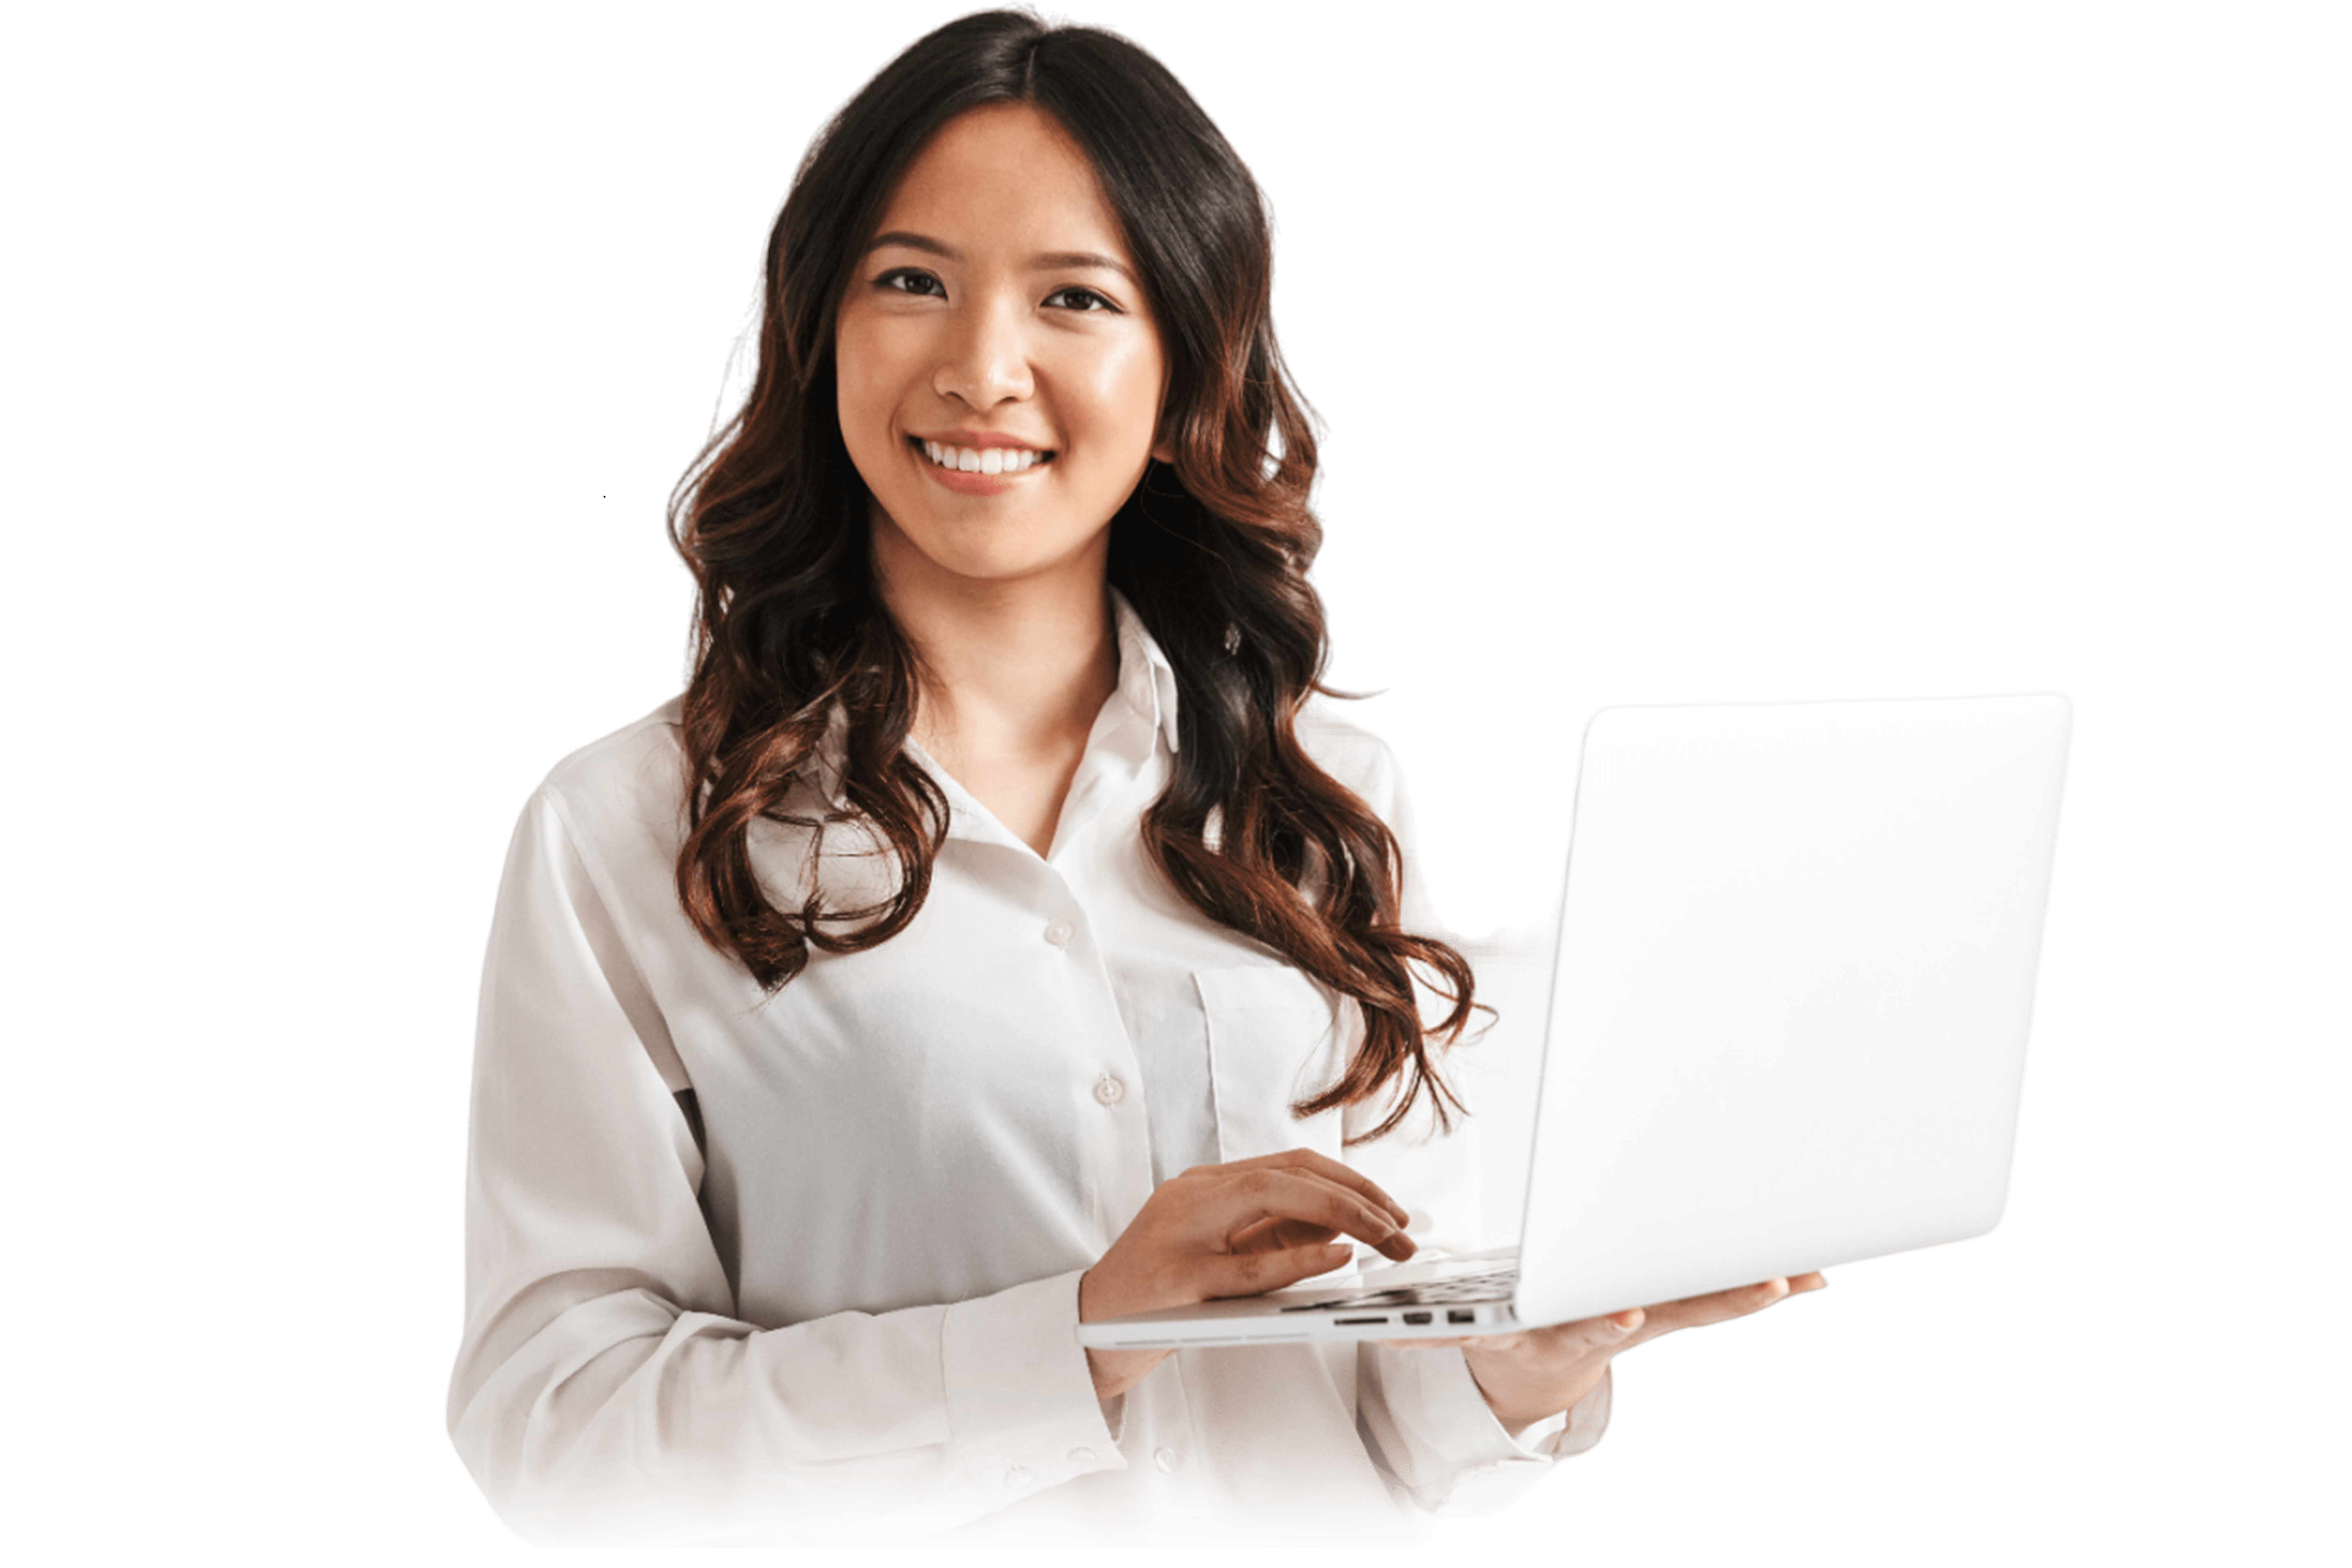 Advertising Development Agency Professional girl holding a laptop